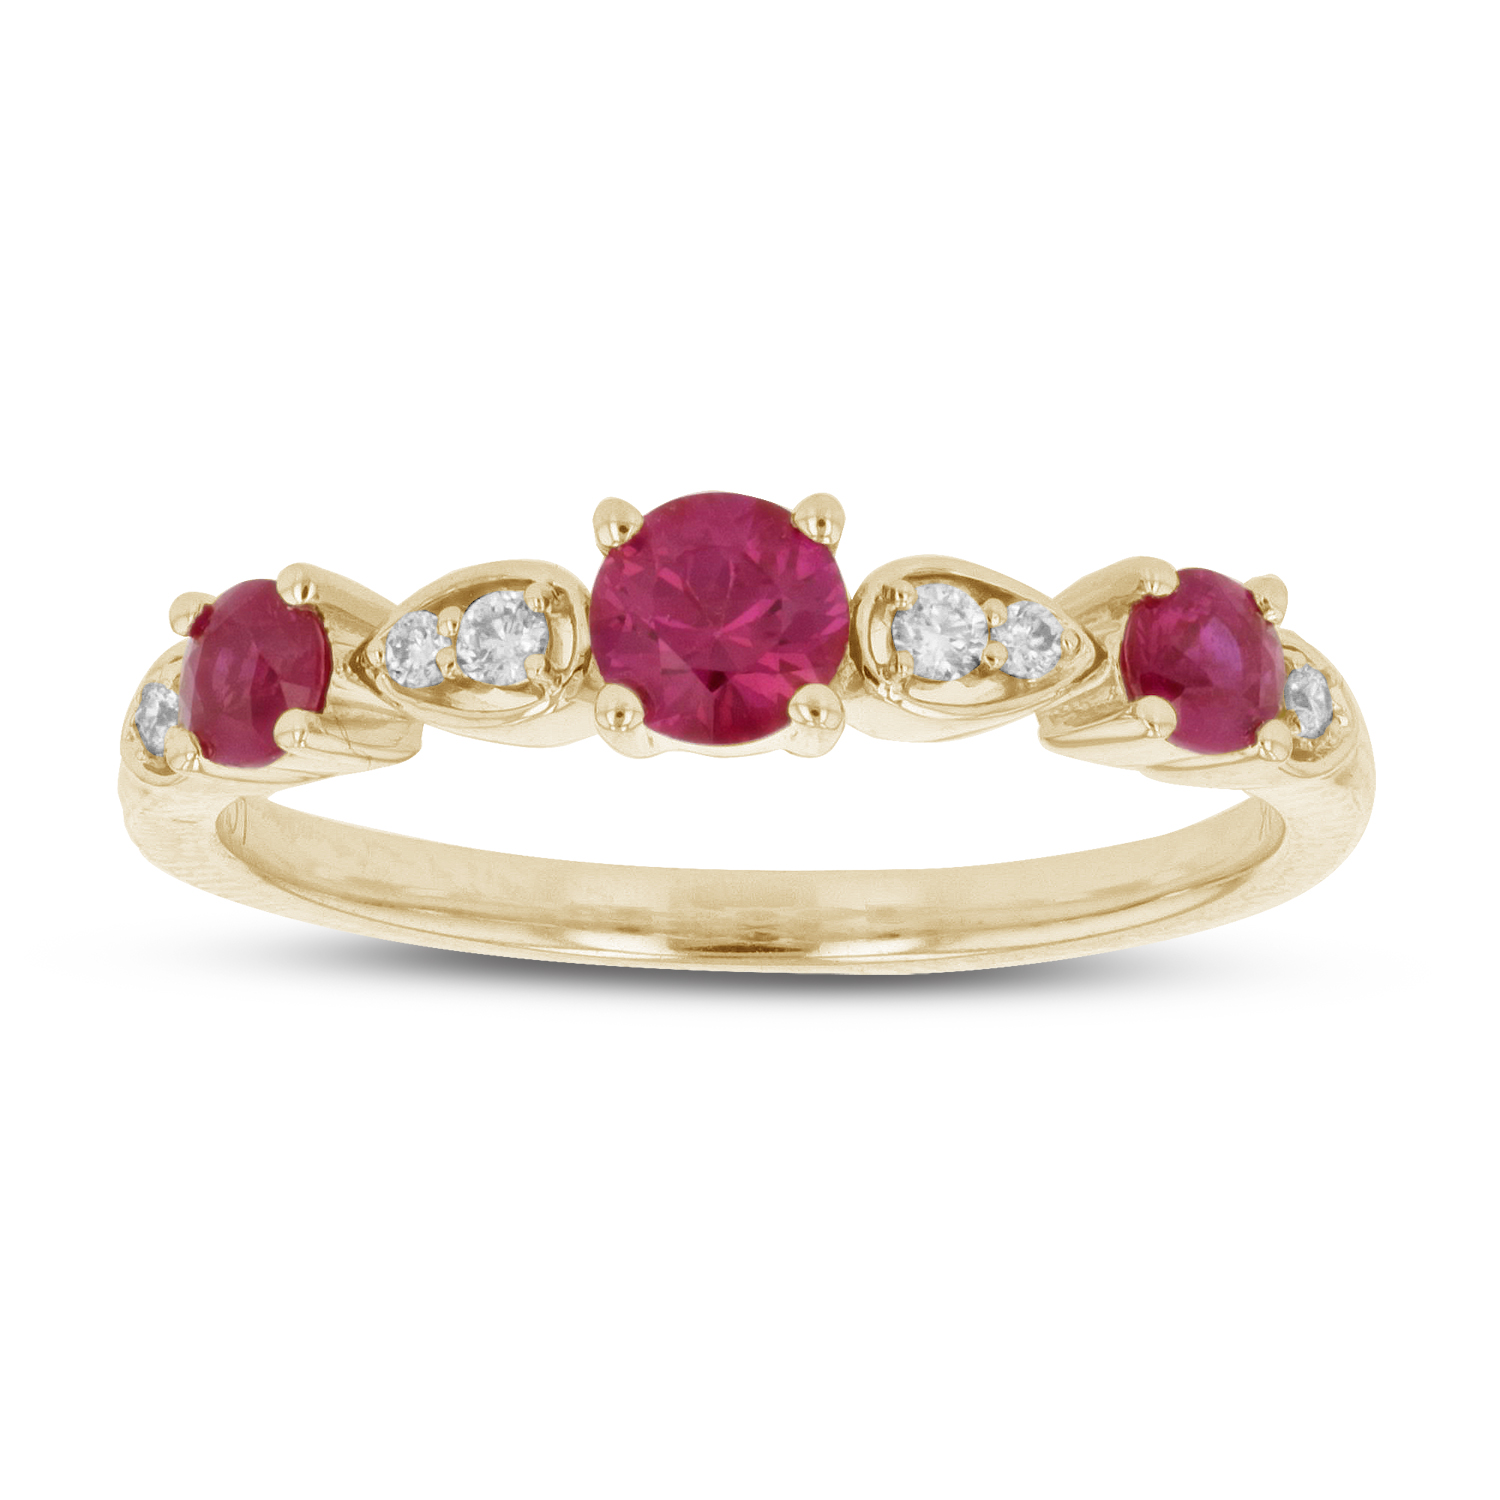 View 0.66ctw Diamond and Ruby Band in 14k Yellow Gold